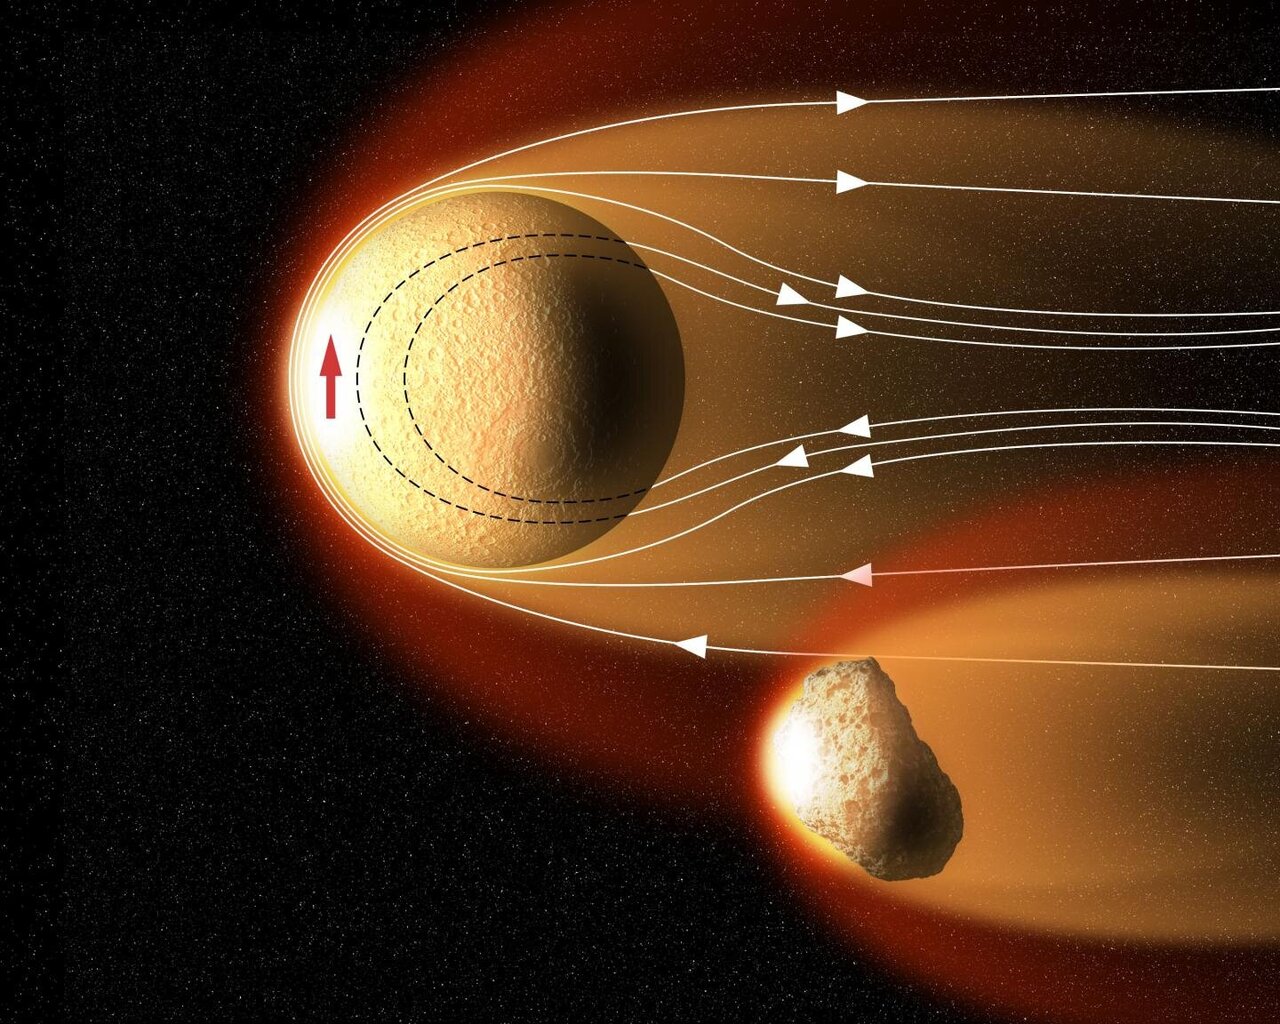 Researchers uncover key clues about the solar system's history